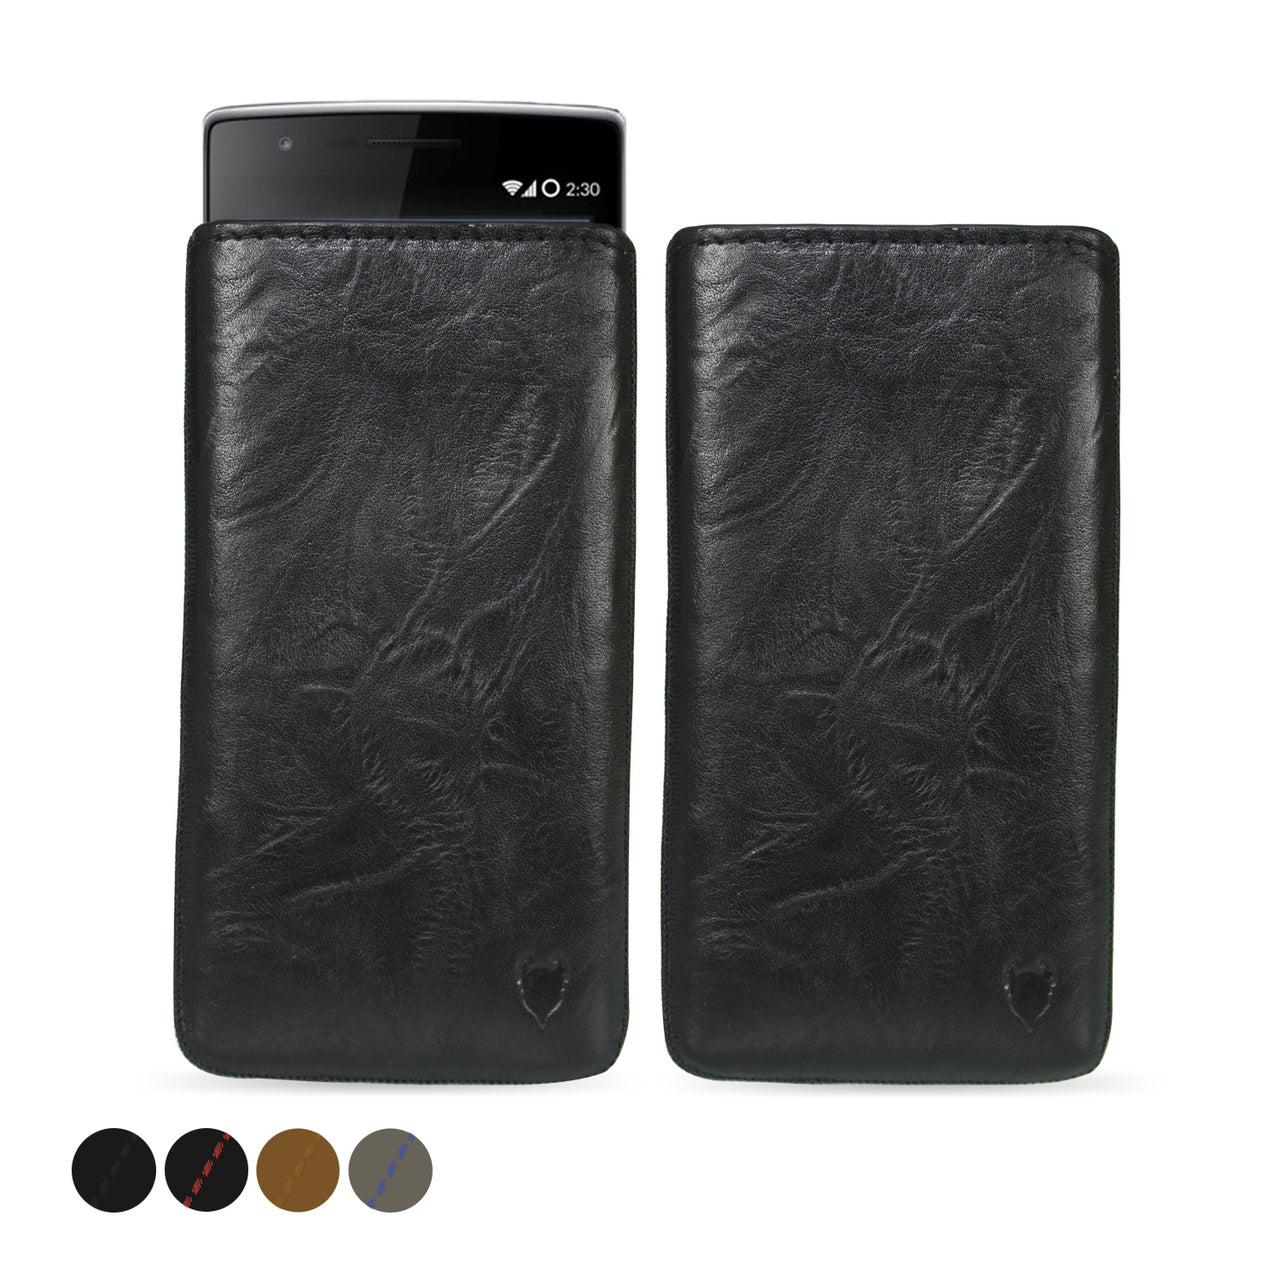 OnePlus One Genuine Leather Pouch Sleeve Case | Artisanpouch